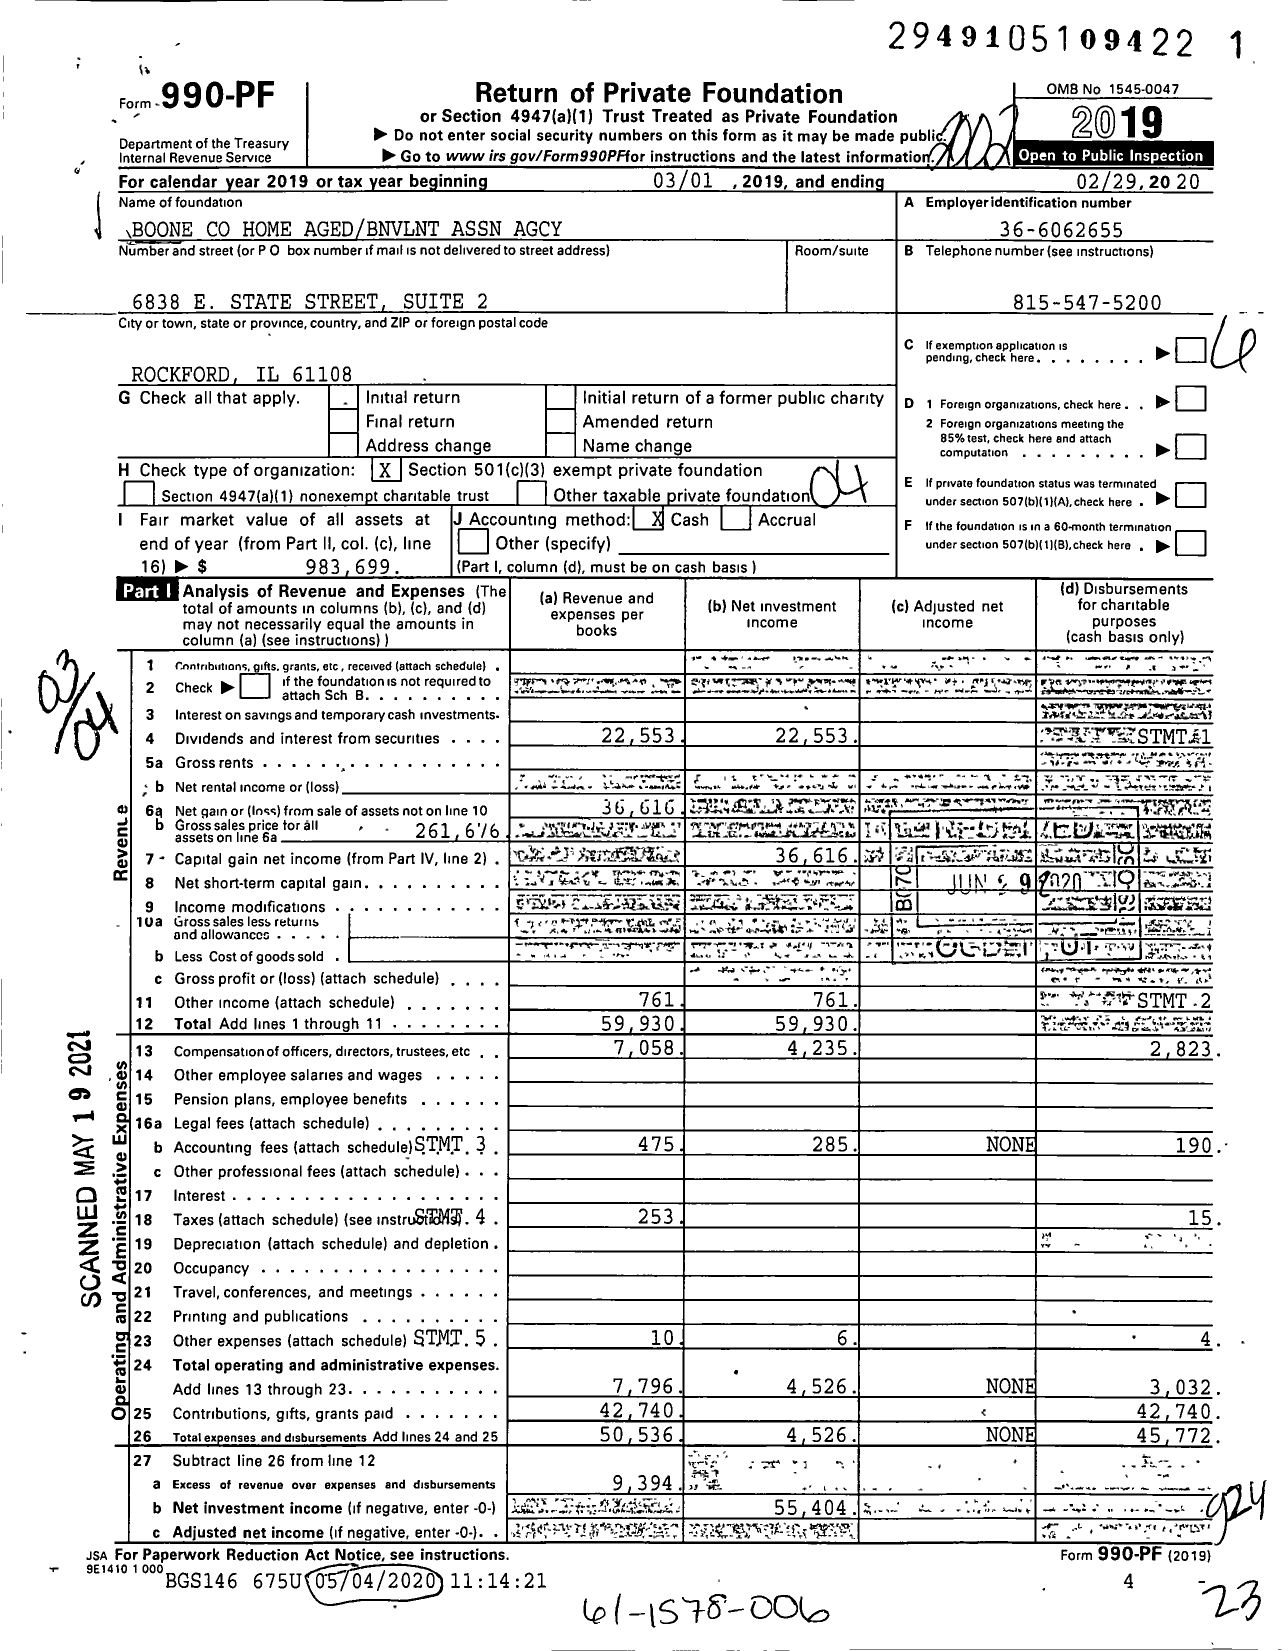 Image of first page of 2019 Form 990PF for Boone Home Agedbnvlnt Association Agcy